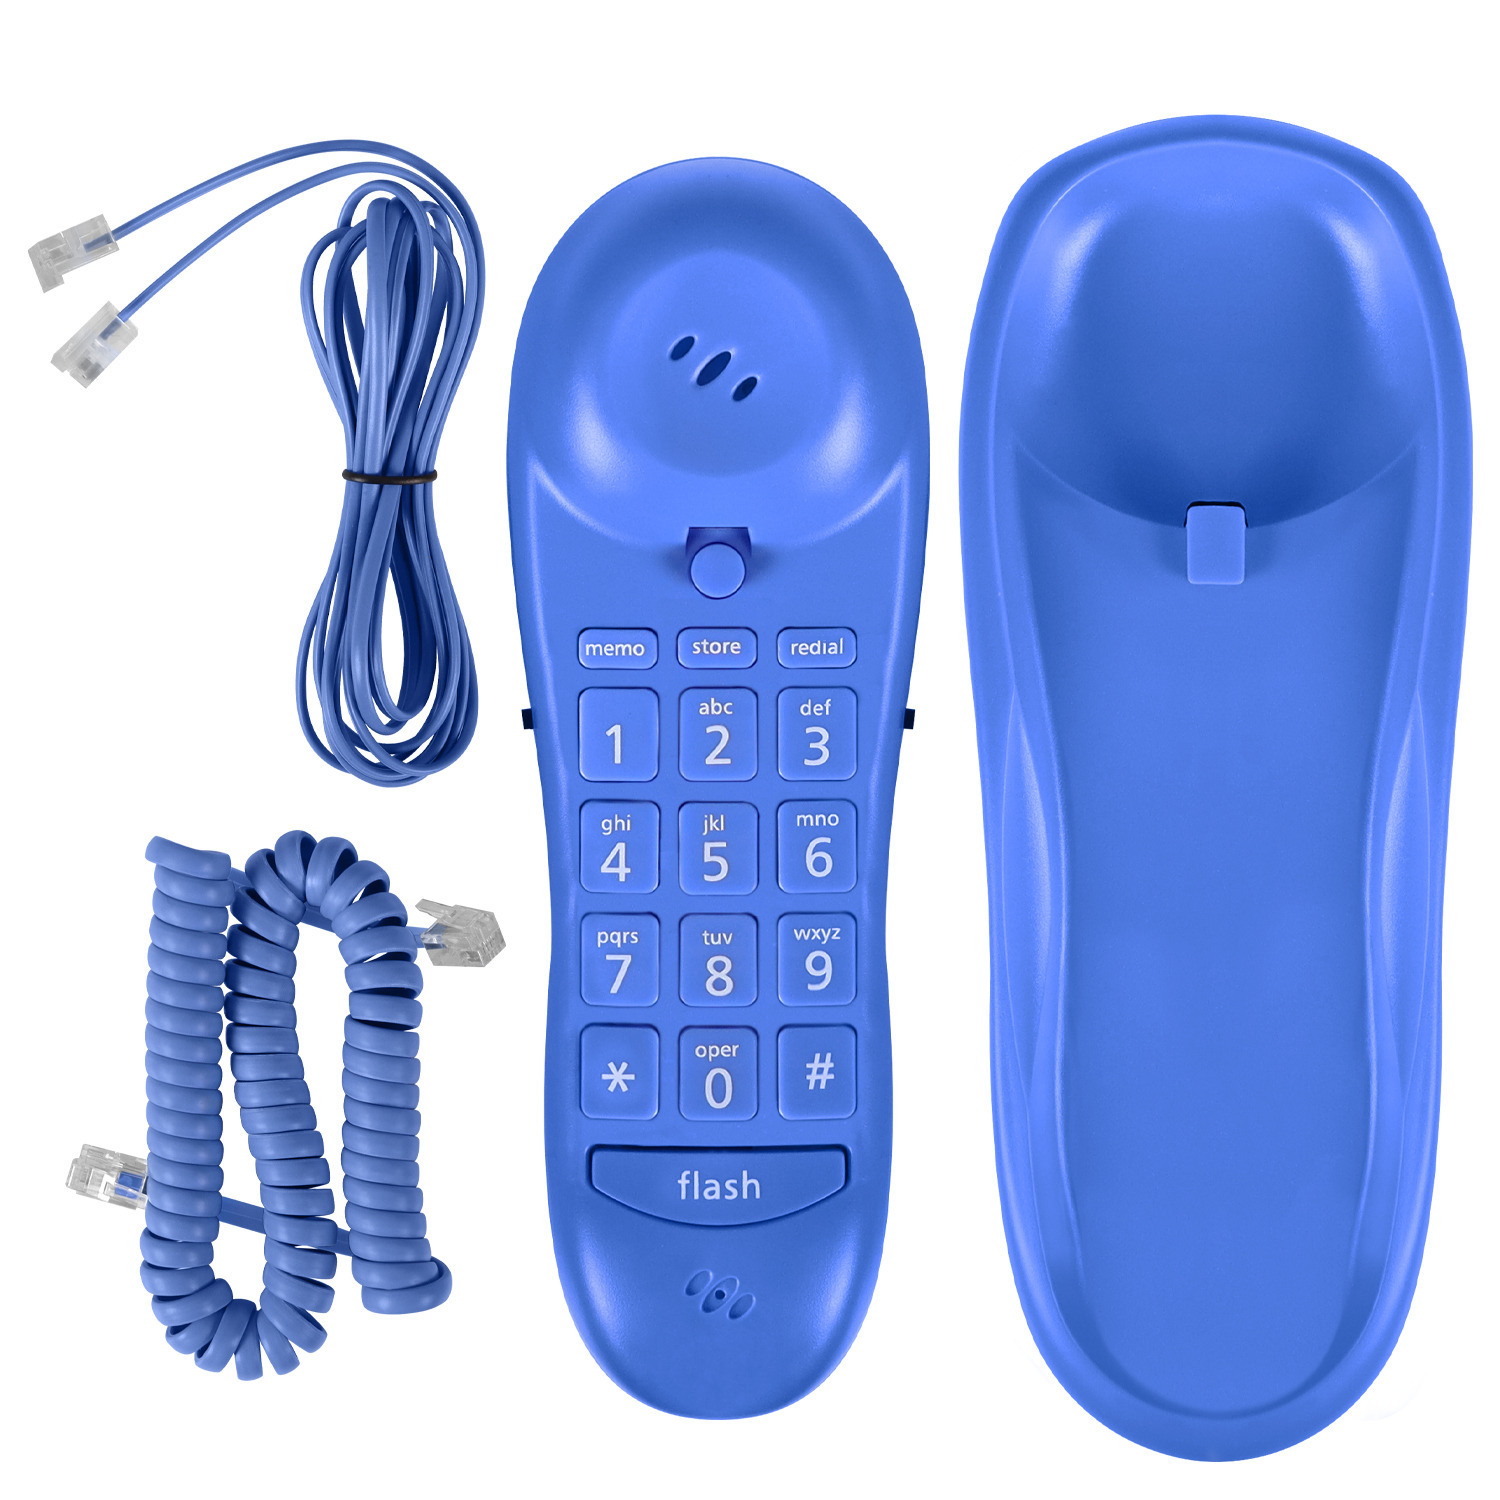 Slimline Blue Colored Phone For Wall Or Desk With Memory